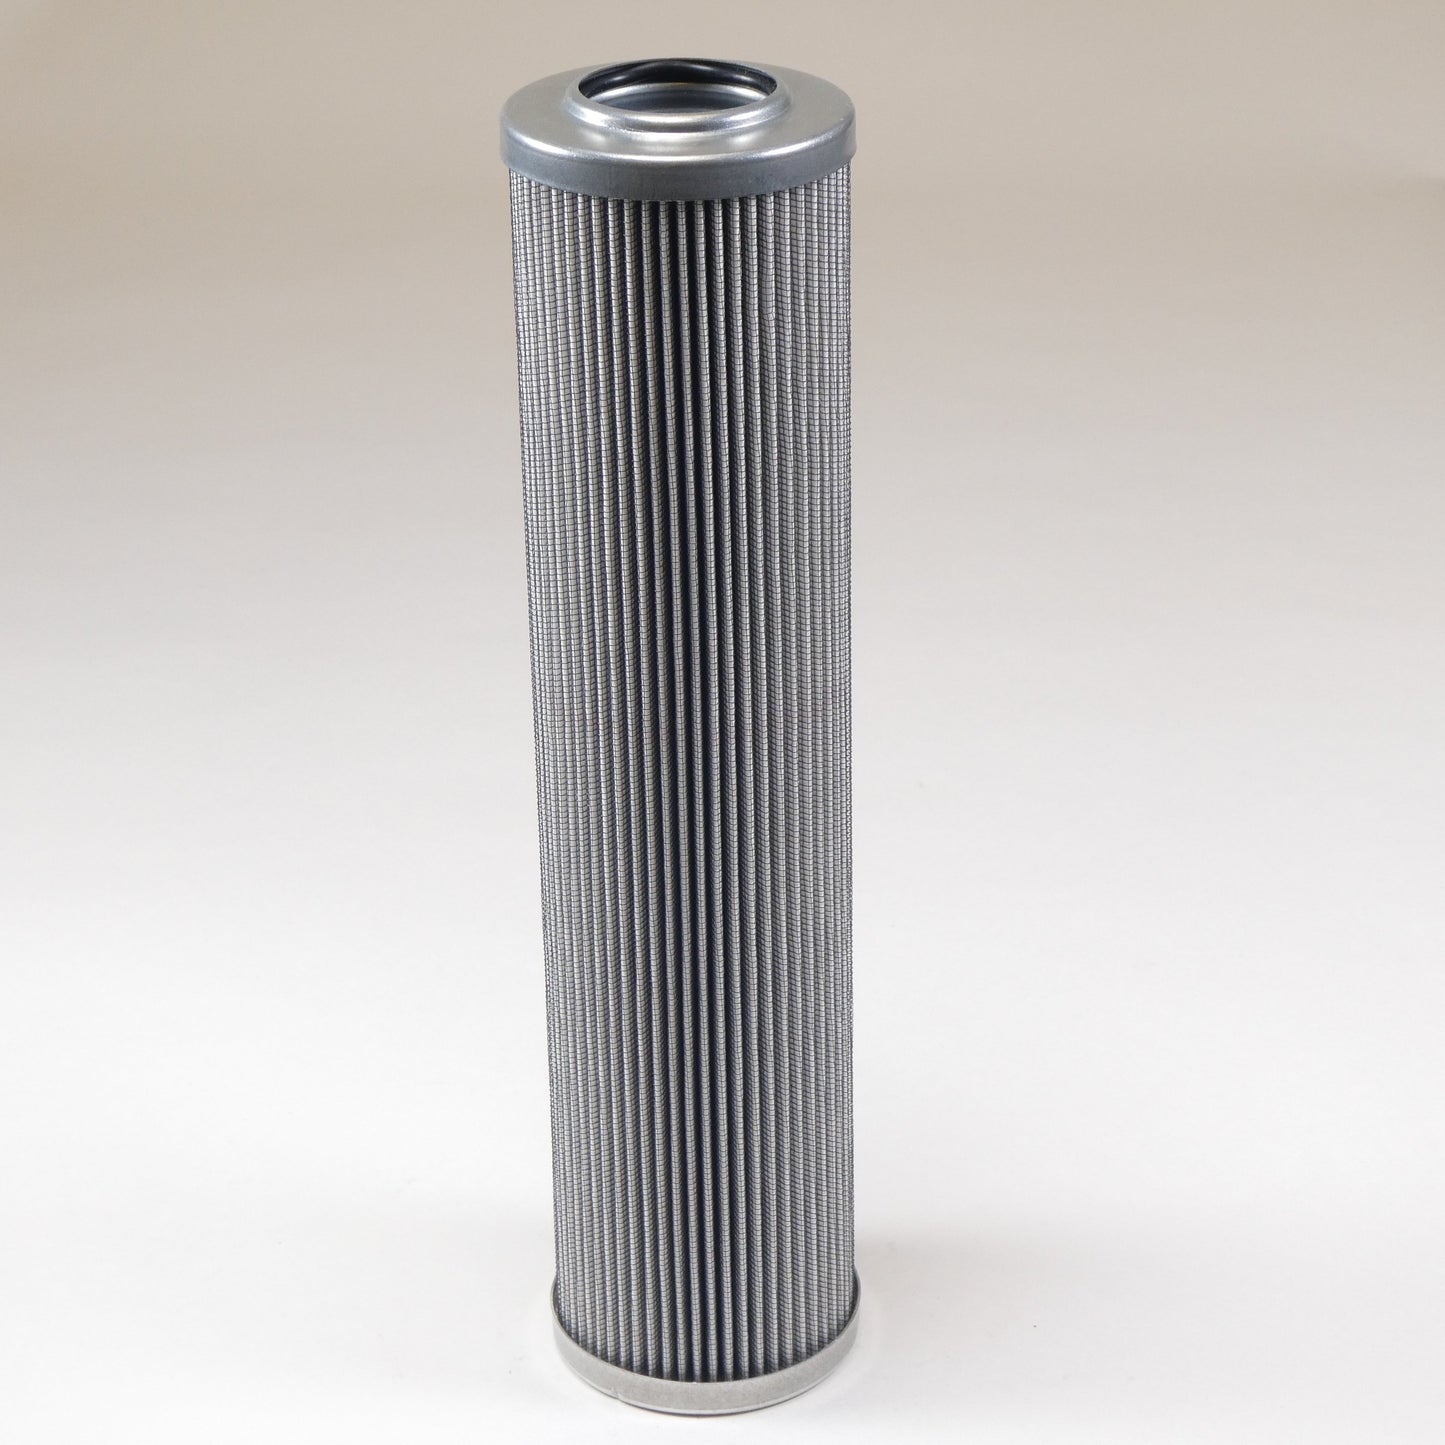 Hydrafil Replacement Filter Element for Donaldson DX2-9600-13-13UM